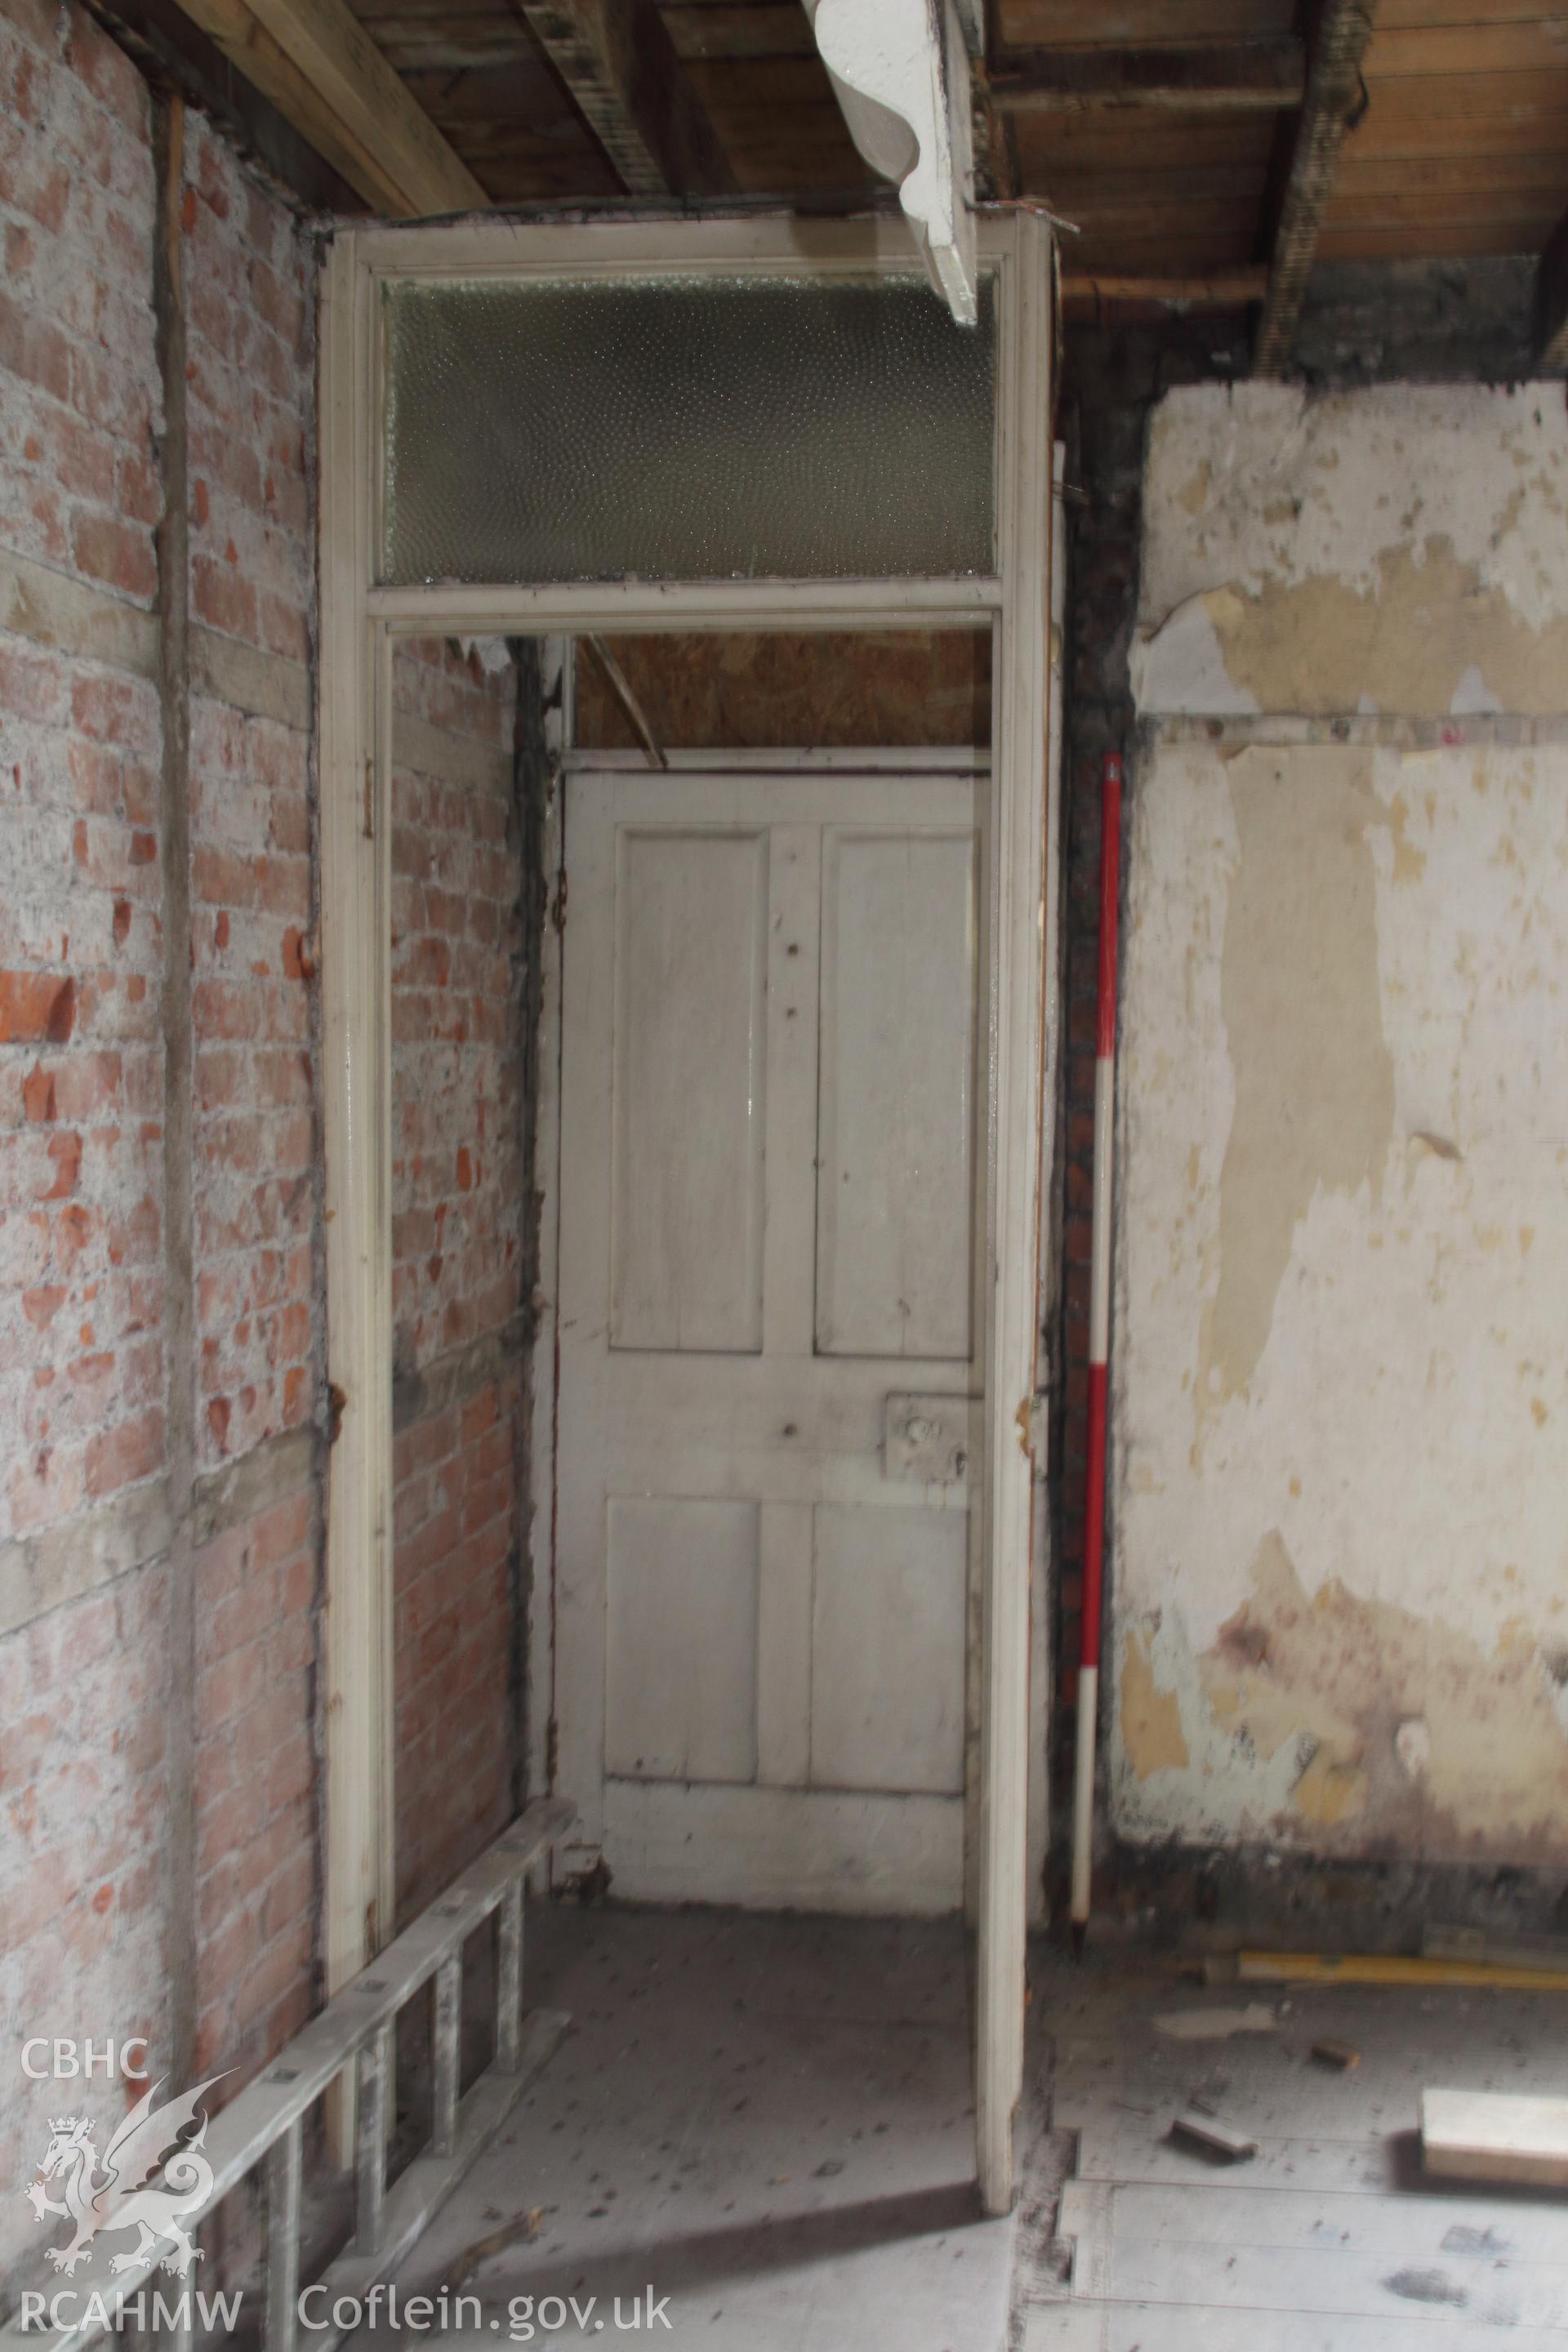 Digital colour photograph showing internal view of house doorway, looking north. Produced during HRSW Report No 208, "London House, Beach Road, Penclawdd. Archaeological Building Investigation & Recording," by Richard Scott Jones, May 2019.